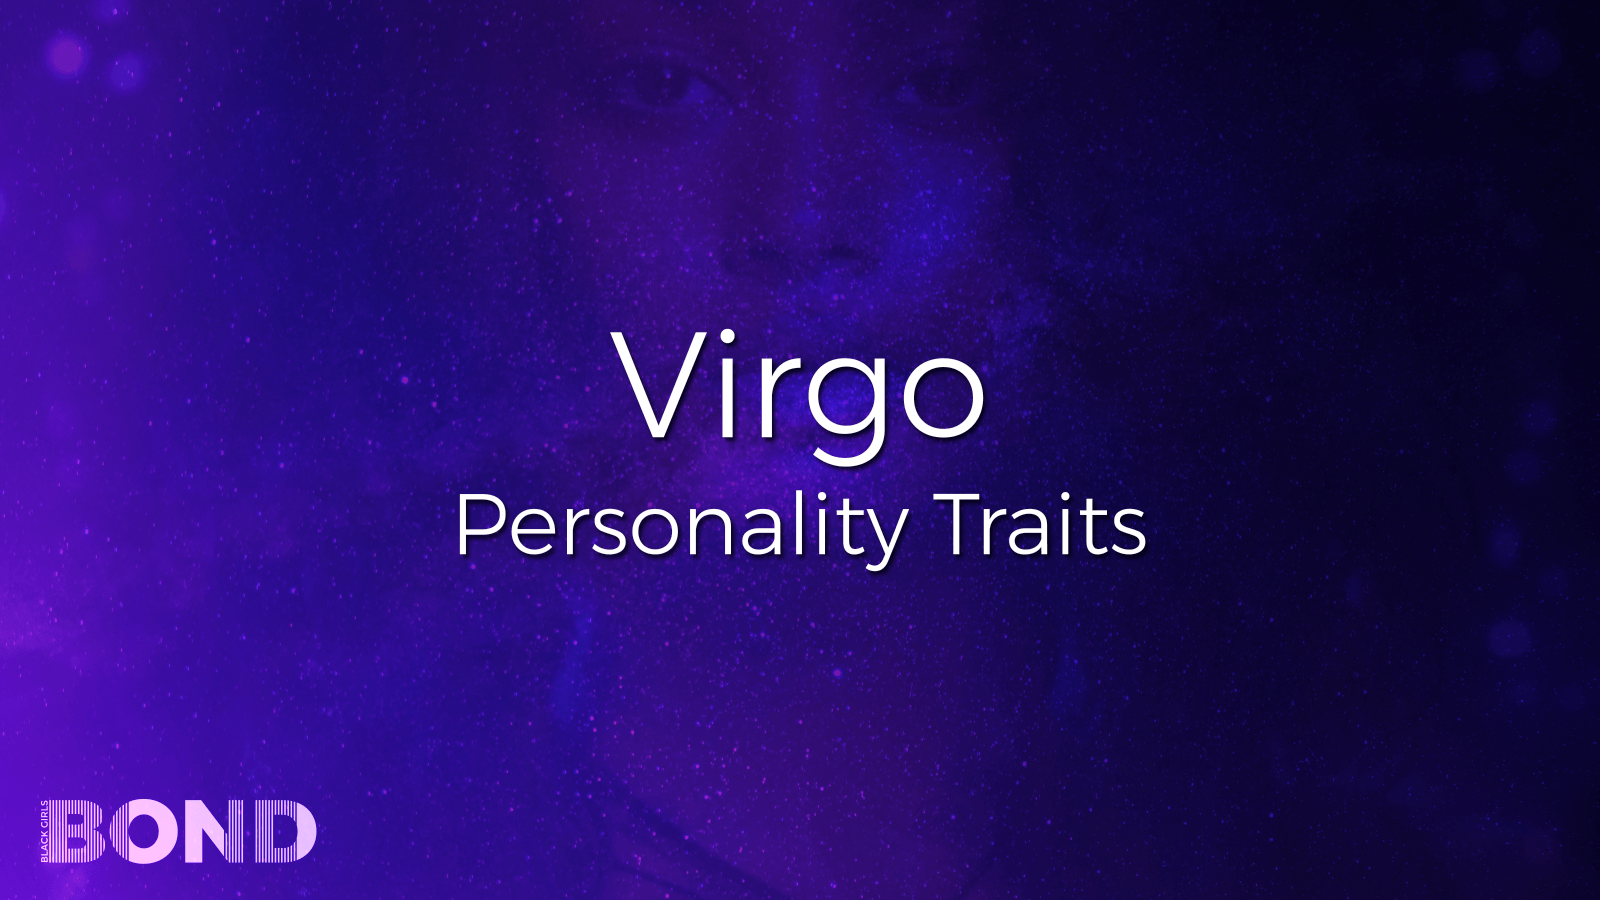 Virgo Zodiac Sign: Personality Traits, Compatibility, Love, Relationships and More